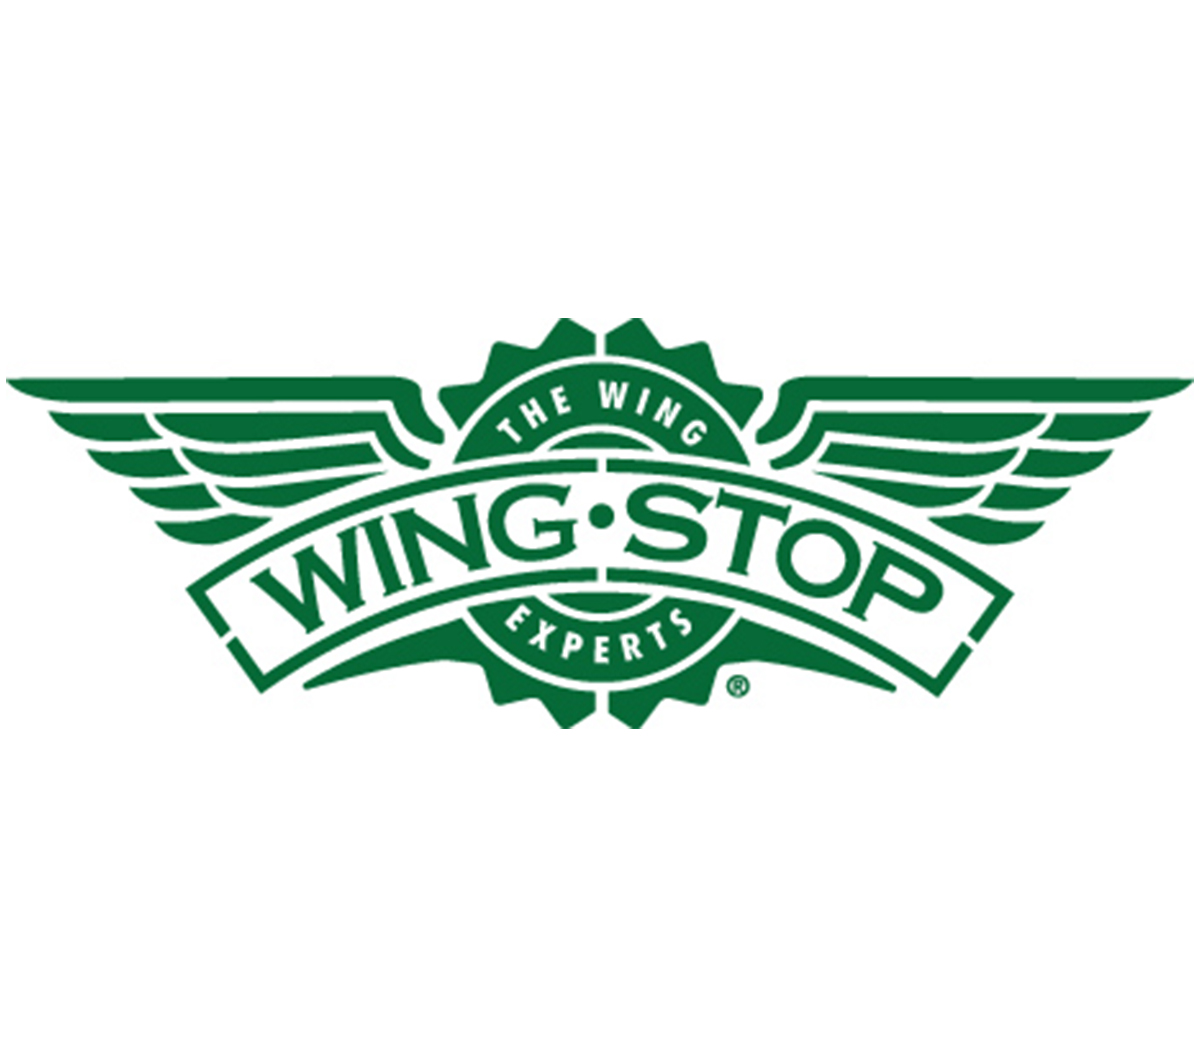 SVN Summit Commercial Group, LLC one of the nation's premier net lease brokerage firms, completed the deal for a new Wingstop location at 1928 Portage Trail.  Wingstop plans to open by the end of the year and will become the neighbor of Smoothie King which opened last year. 

Wingstop is one of the fastest growing concepts in the country. The new Cuyahoga Falls location joins the over 1,250 Wingstop restaurants in operation across the globe.  Nichole Booker, Advisor at SVN Summit Commercial Group, represented the property owner on this transaction.